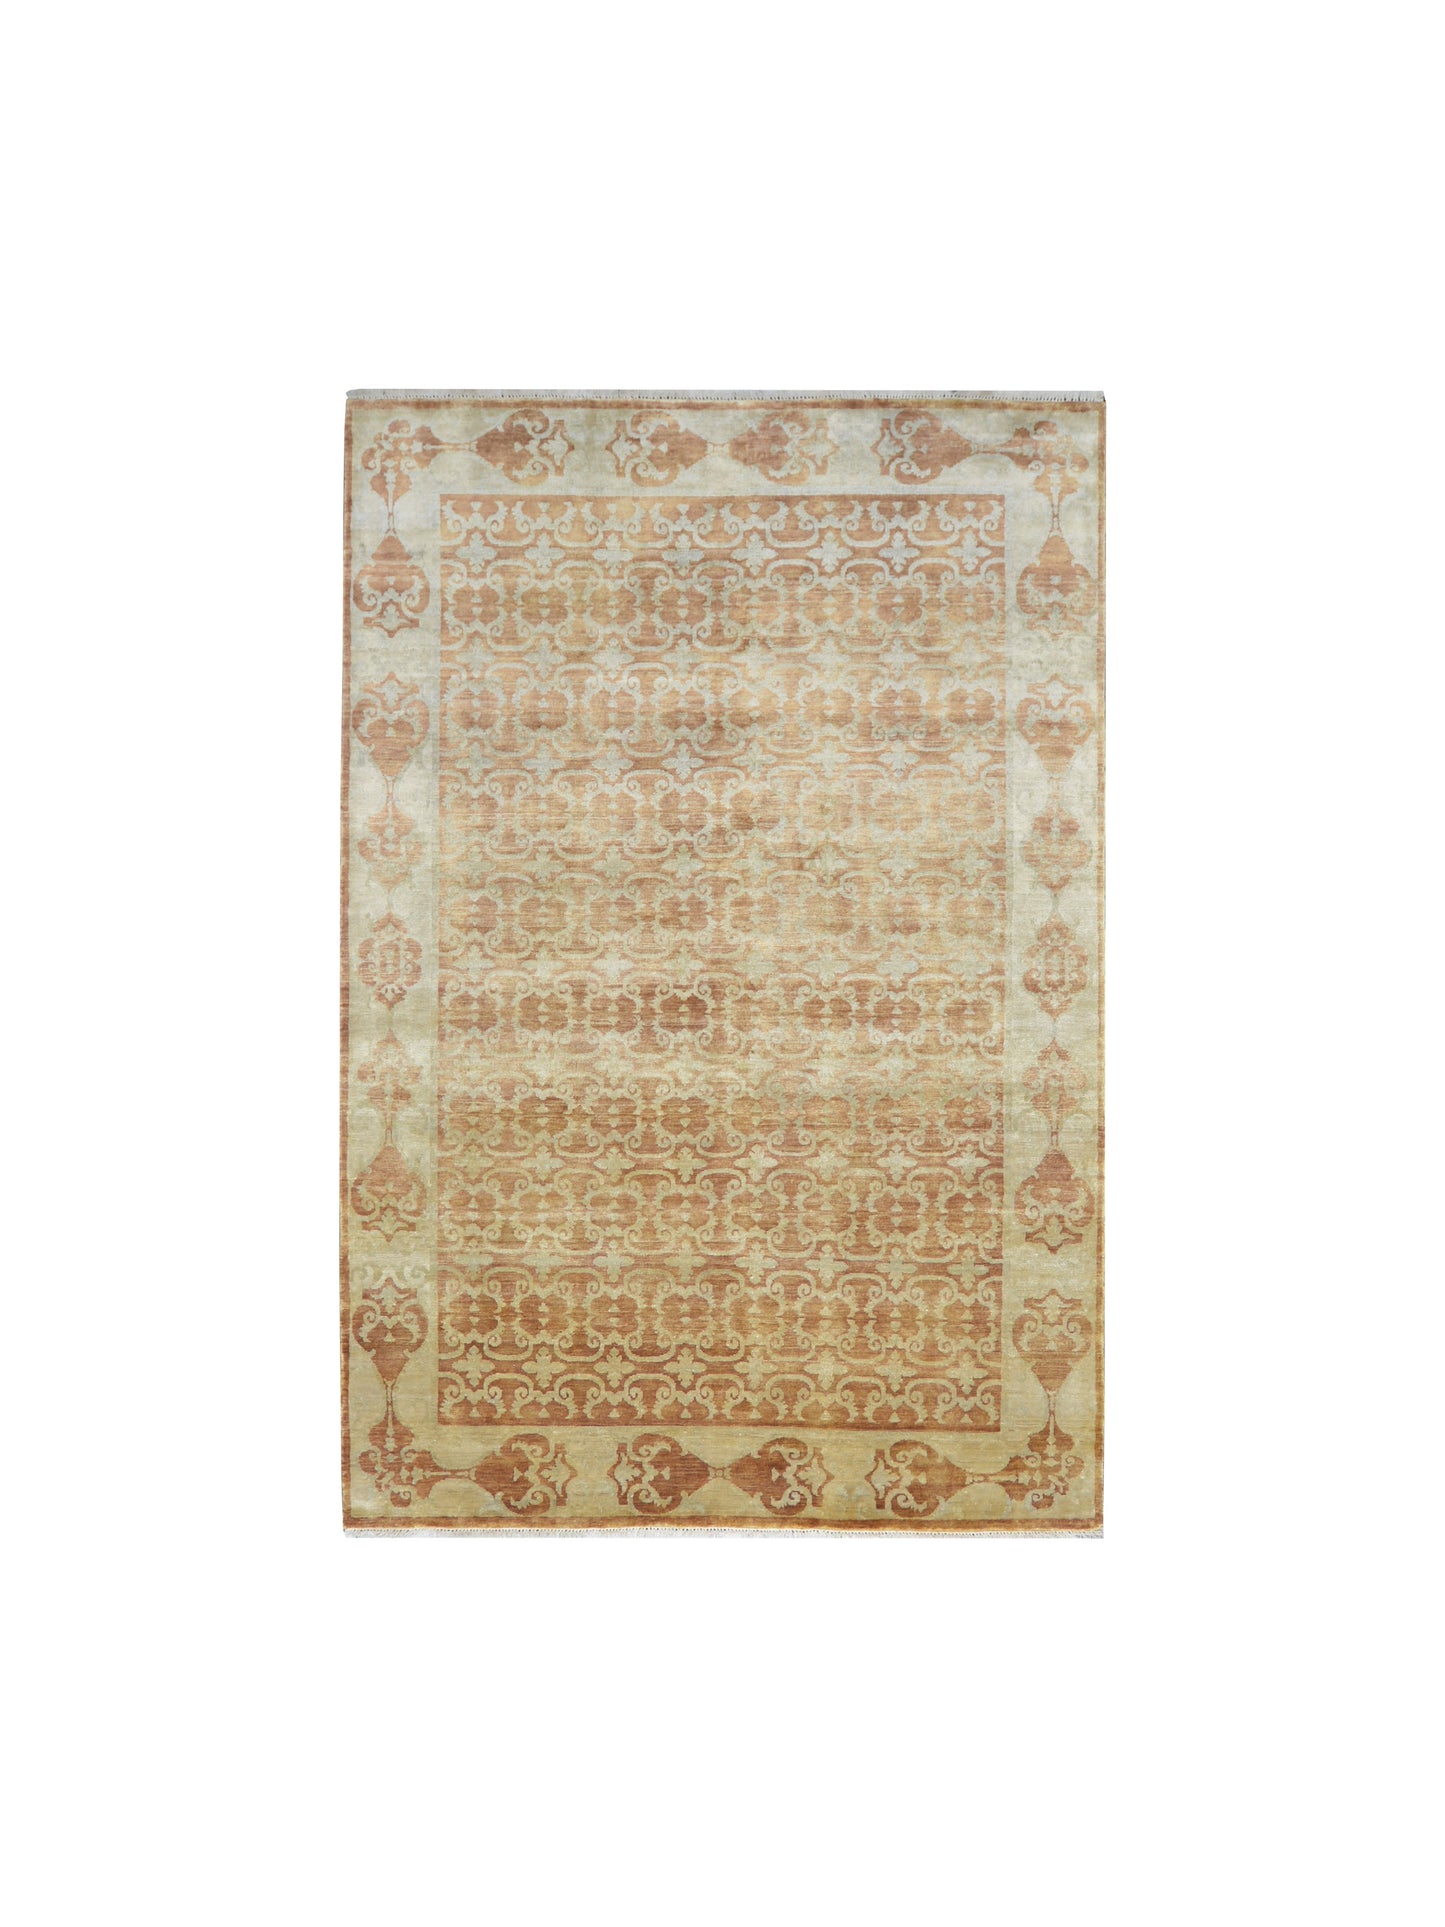 Get trendy with Ivory and Rust Pure Silk Transitional Handknotted Area Rug 6x8.10ft 182x269Cms - Transitional Rugs available at Jaipur Oriental Rugs. Grab yours for $3815.00 today!